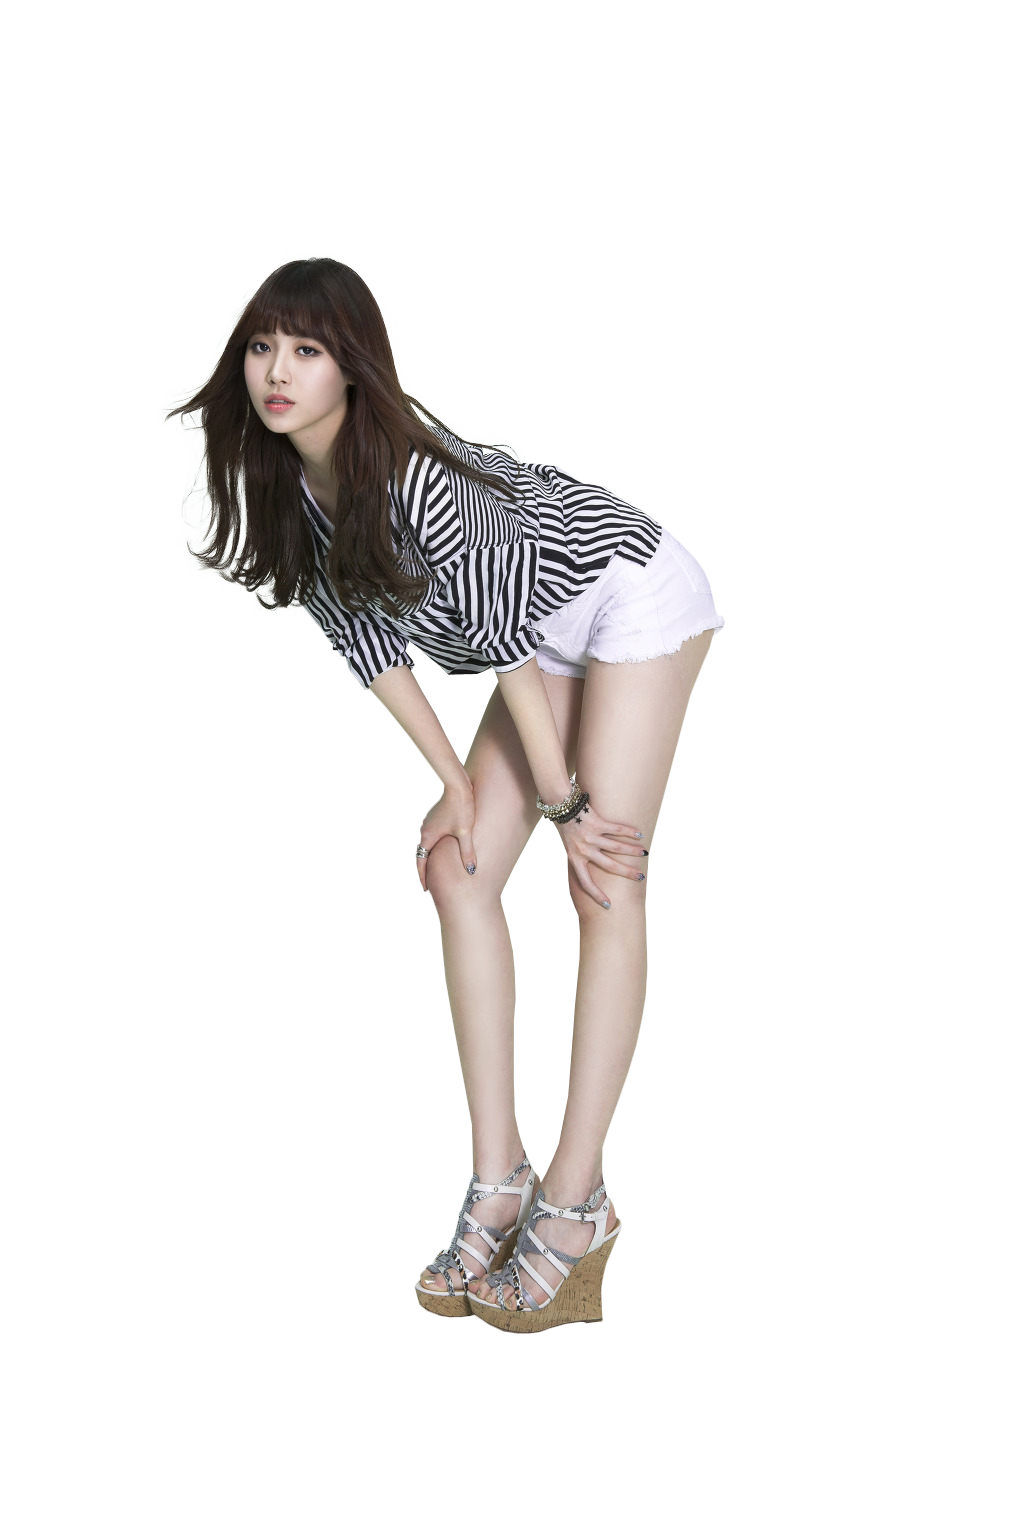 Sexy woman girl PNG image